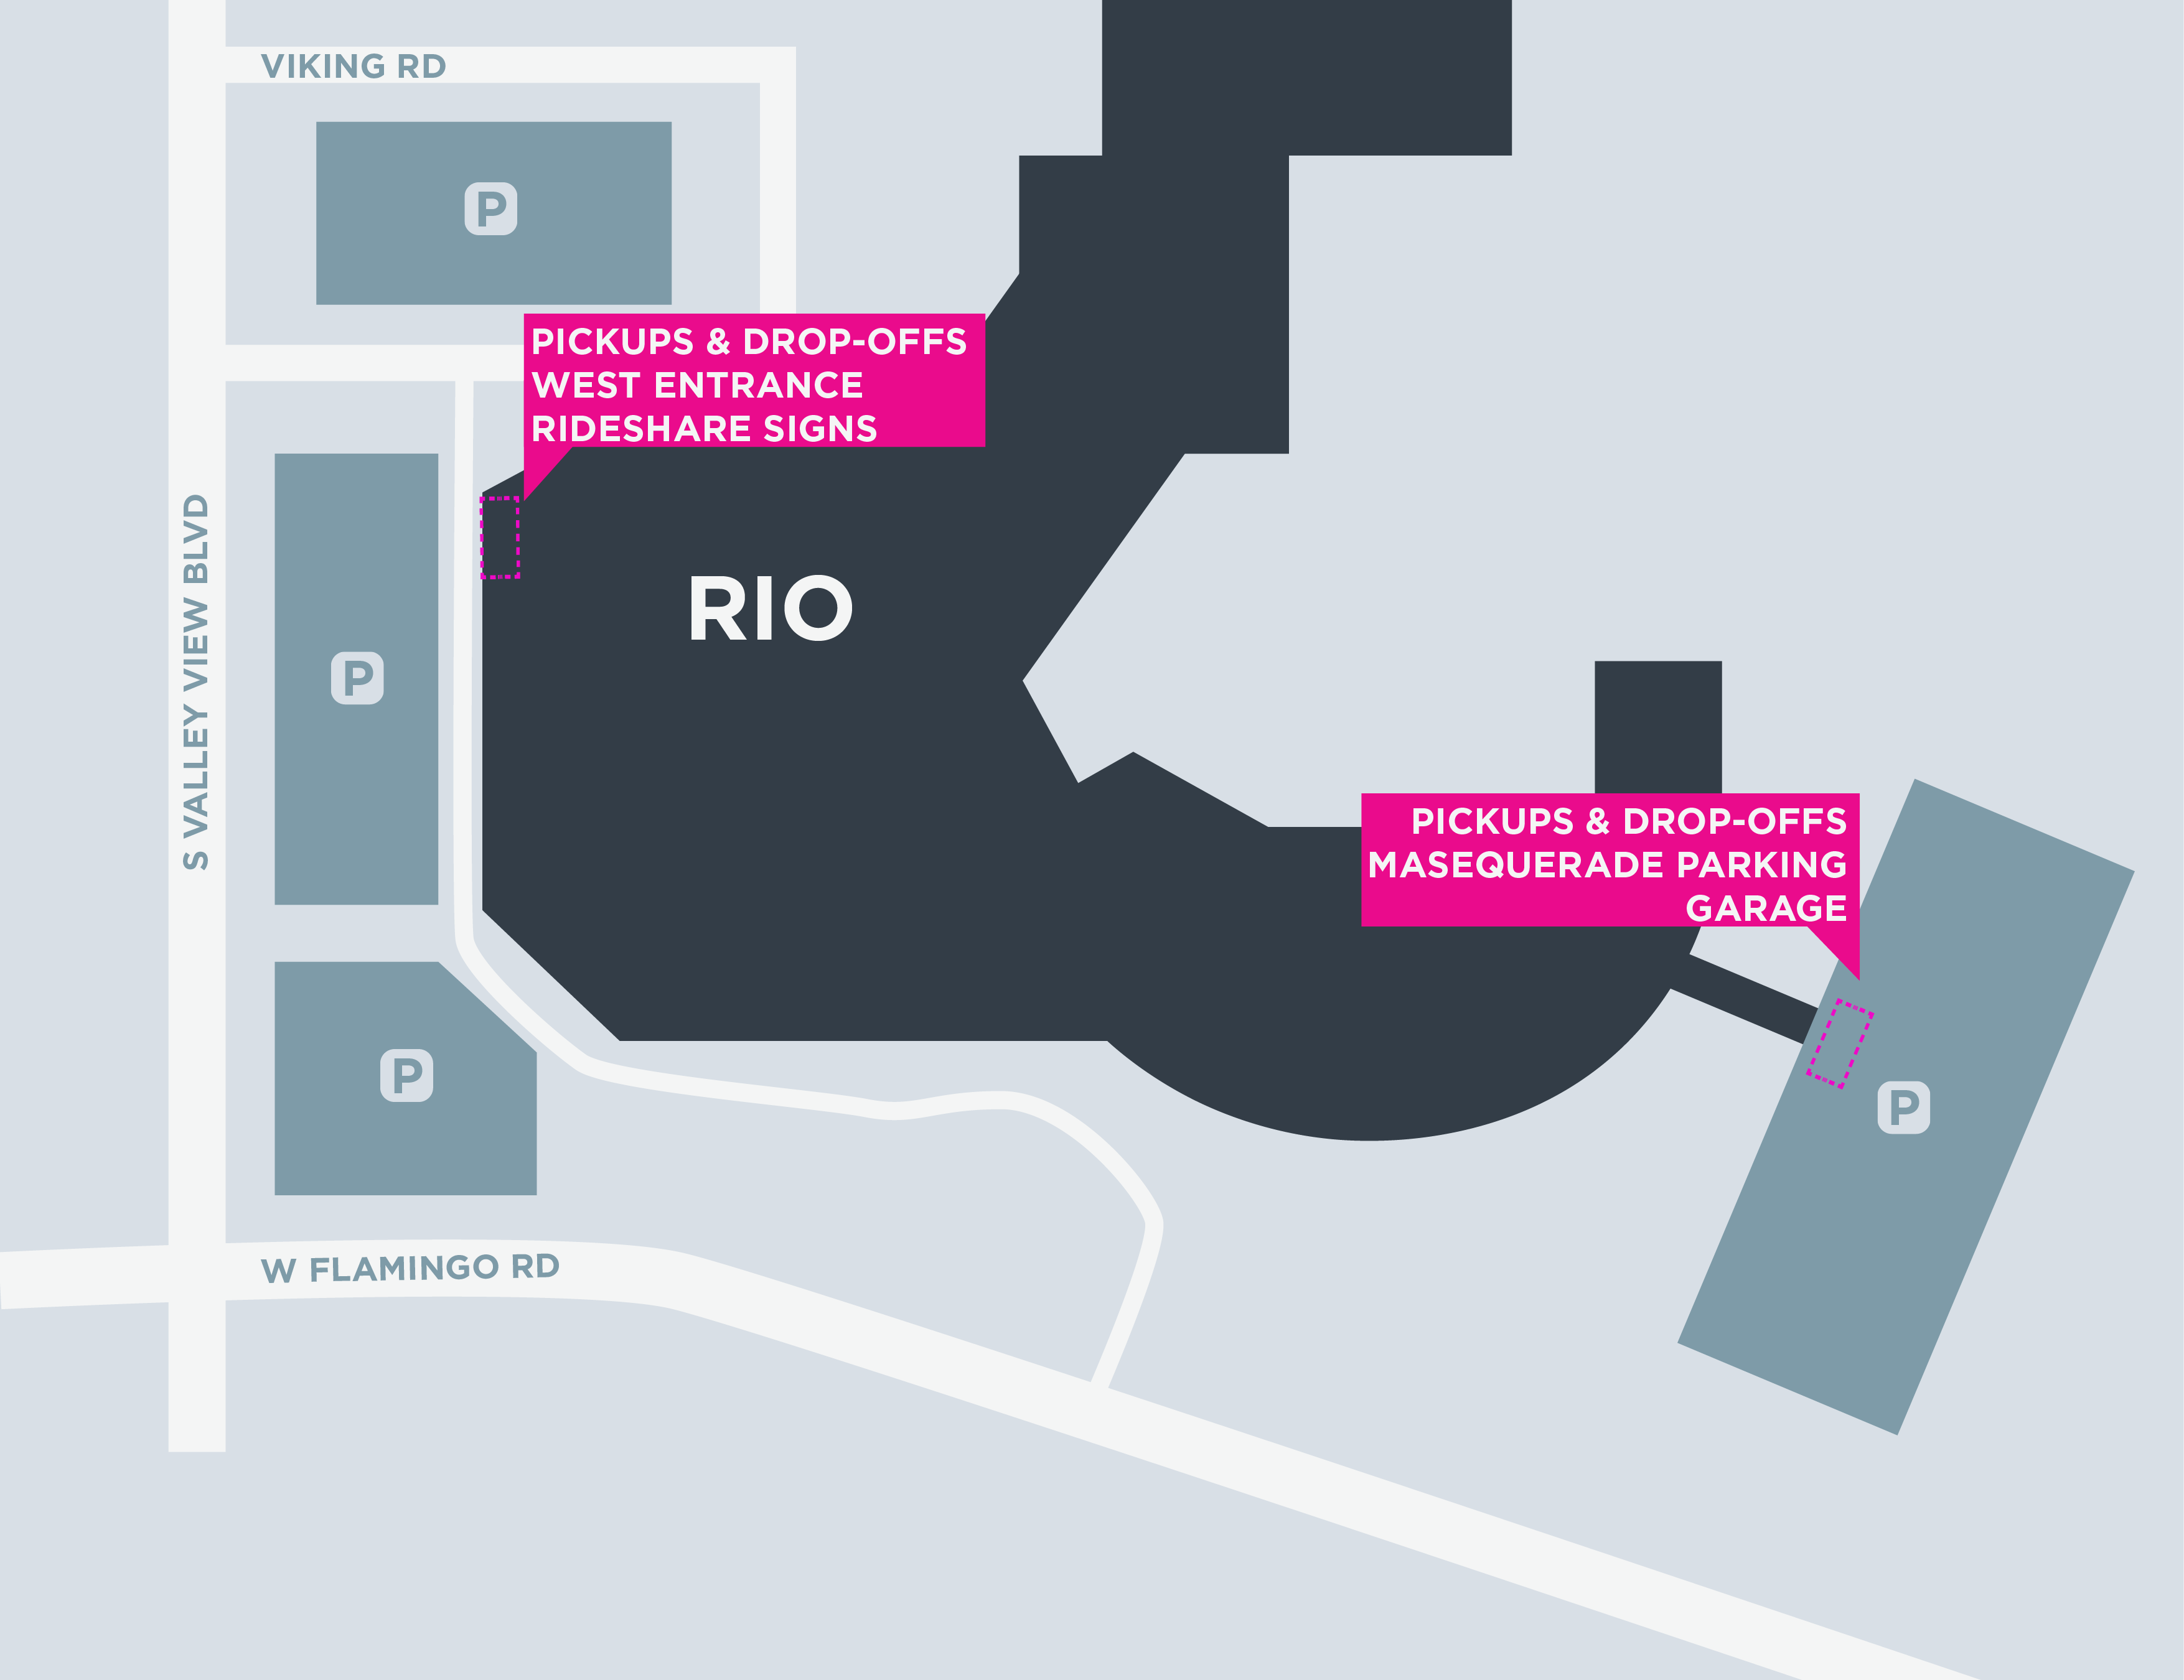 Map of the pickup and drop-off areas at the Rio Hotel in Las Vegas.